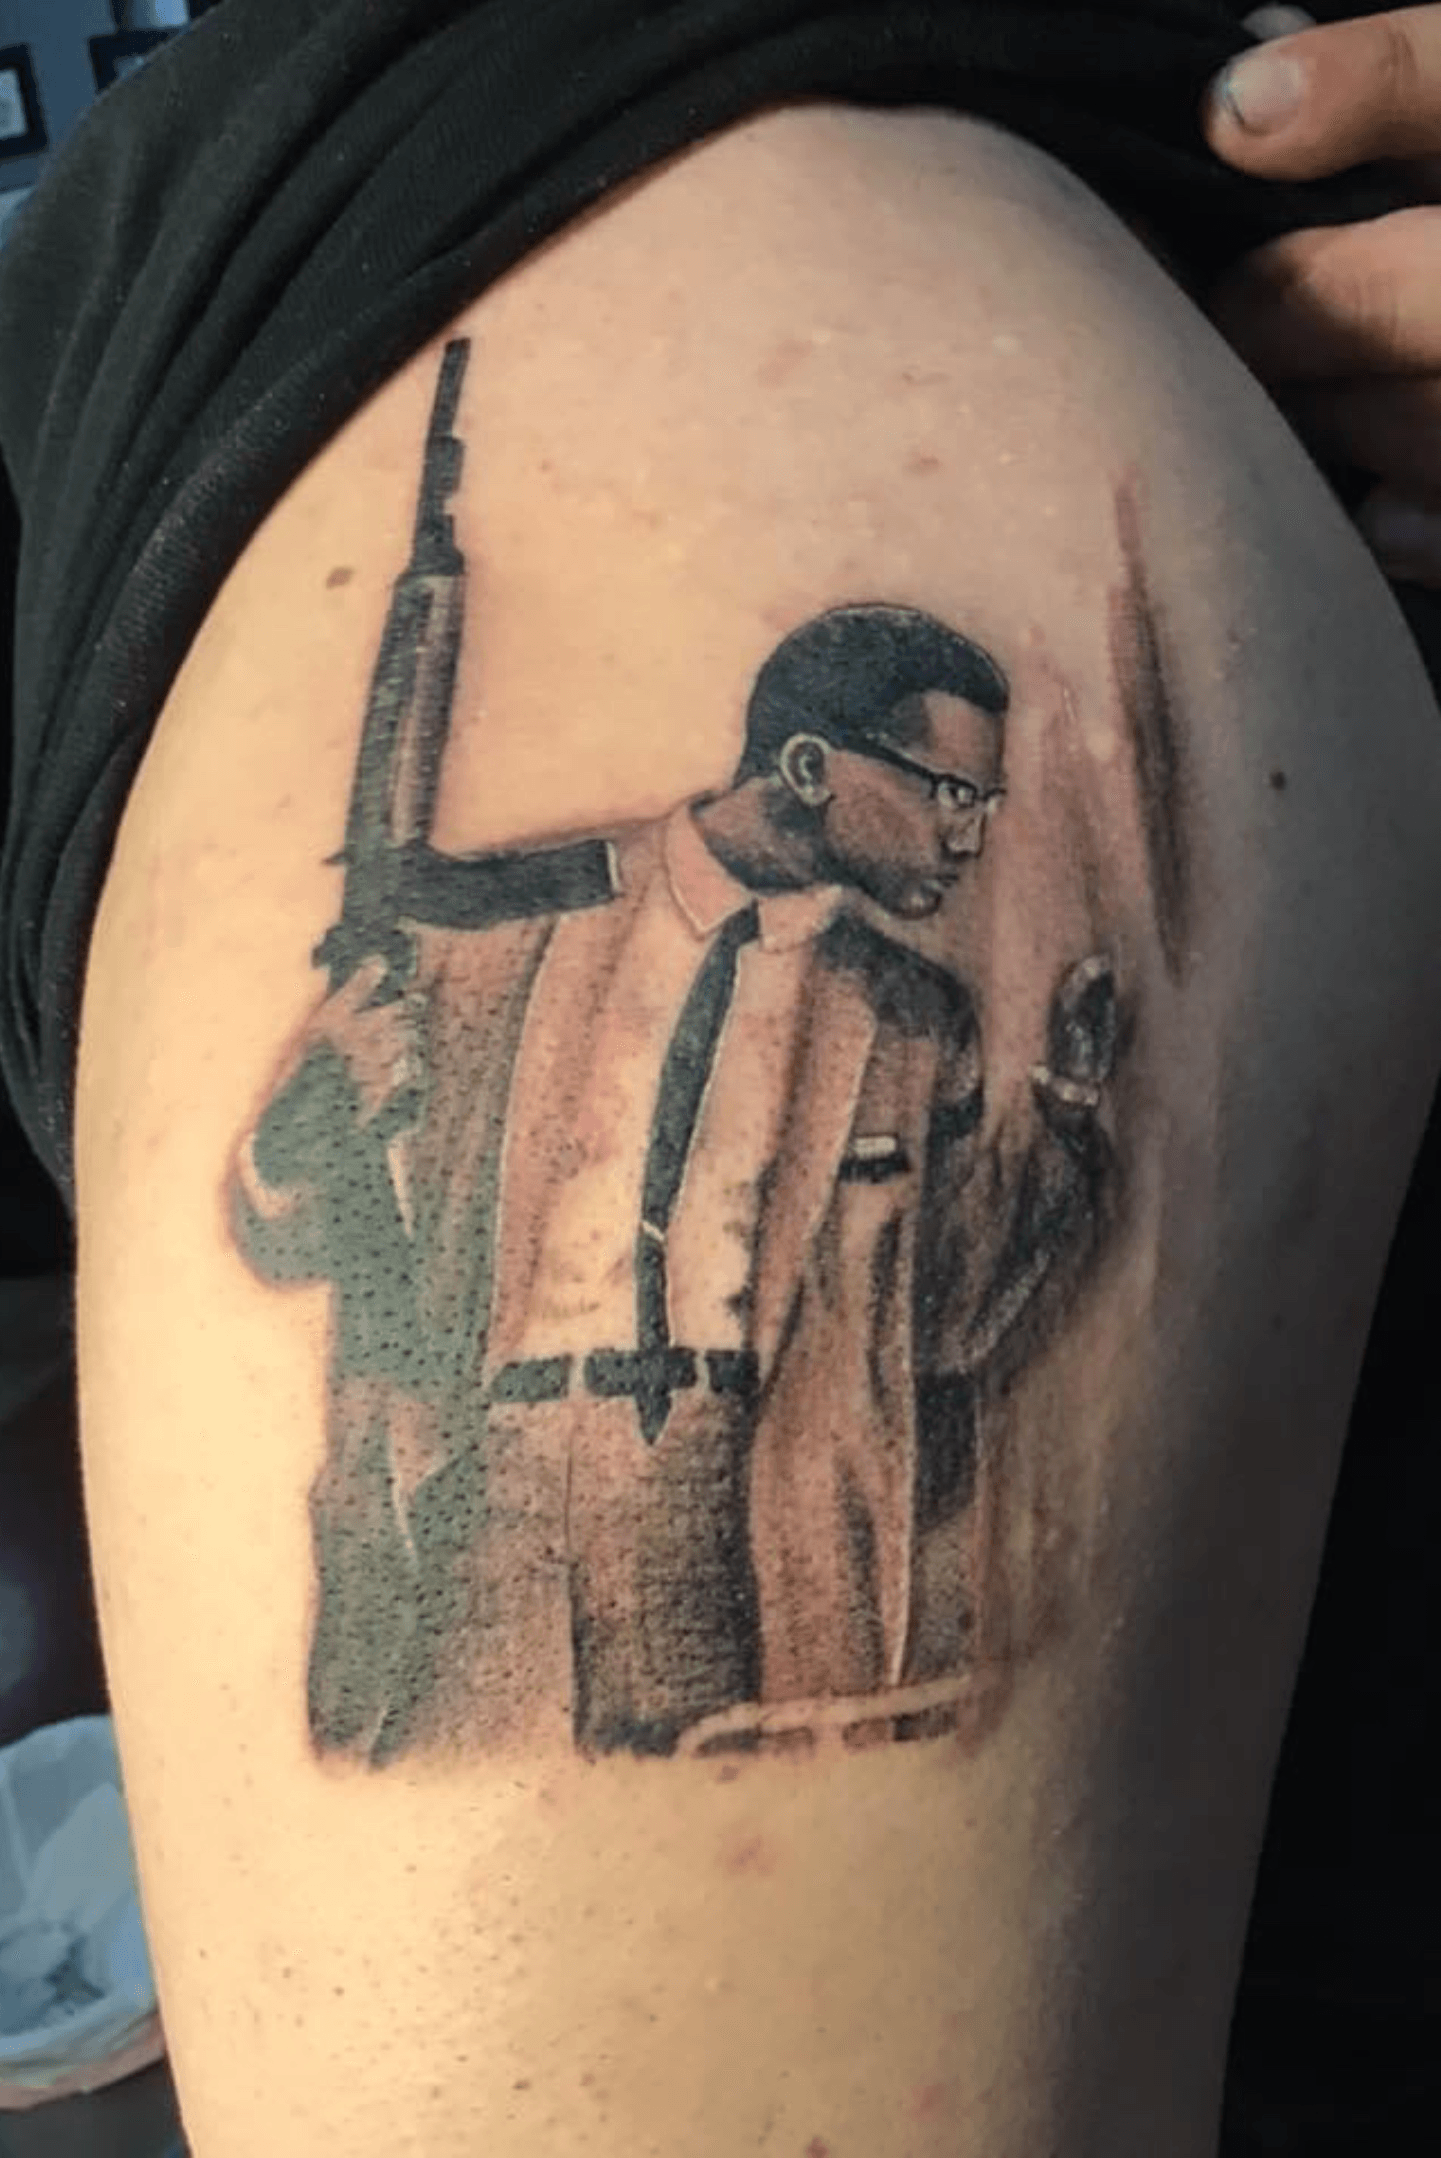 11 BLM Tattoo Ideas That Will Blow Your Mind  alexie